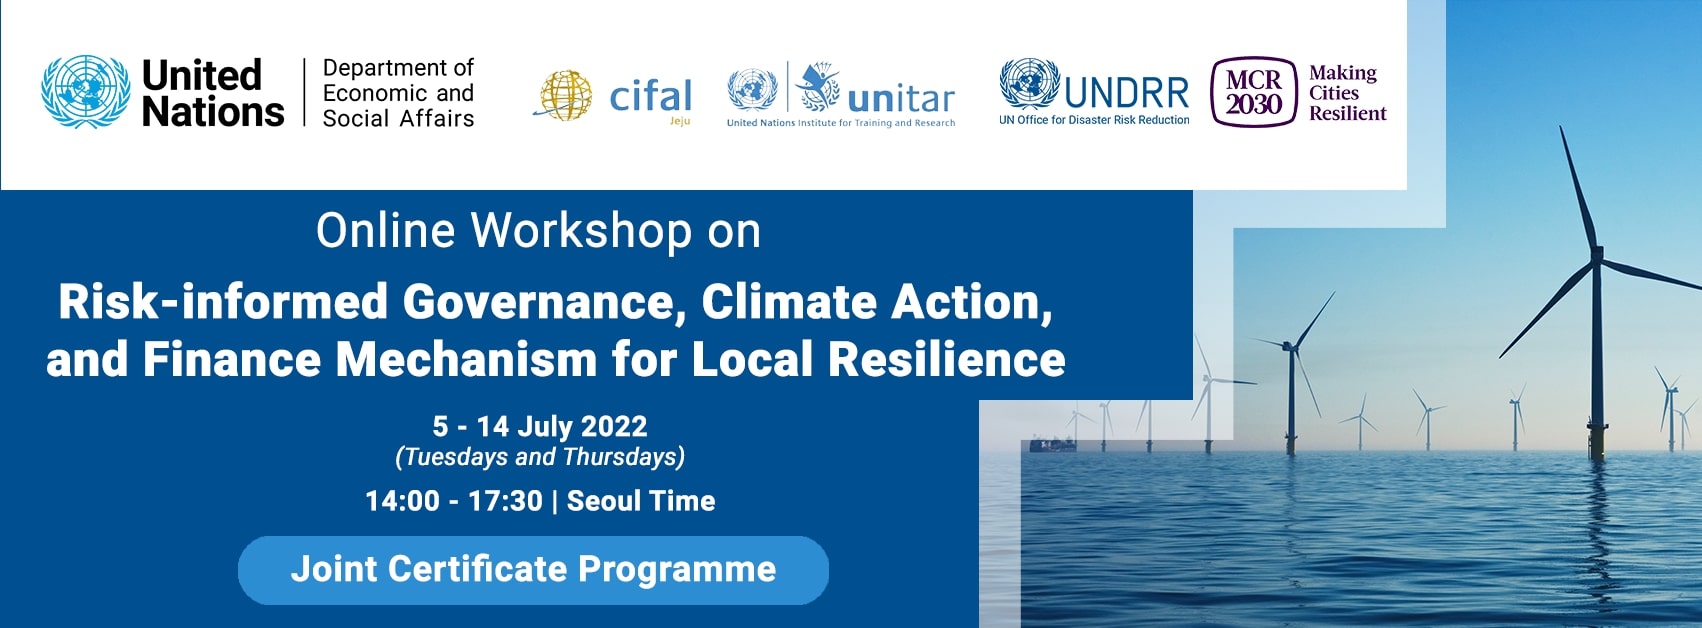 Online Workshop on Risk-informed Governance, Climate Action, and Finance Mechanisms for Local Resilience